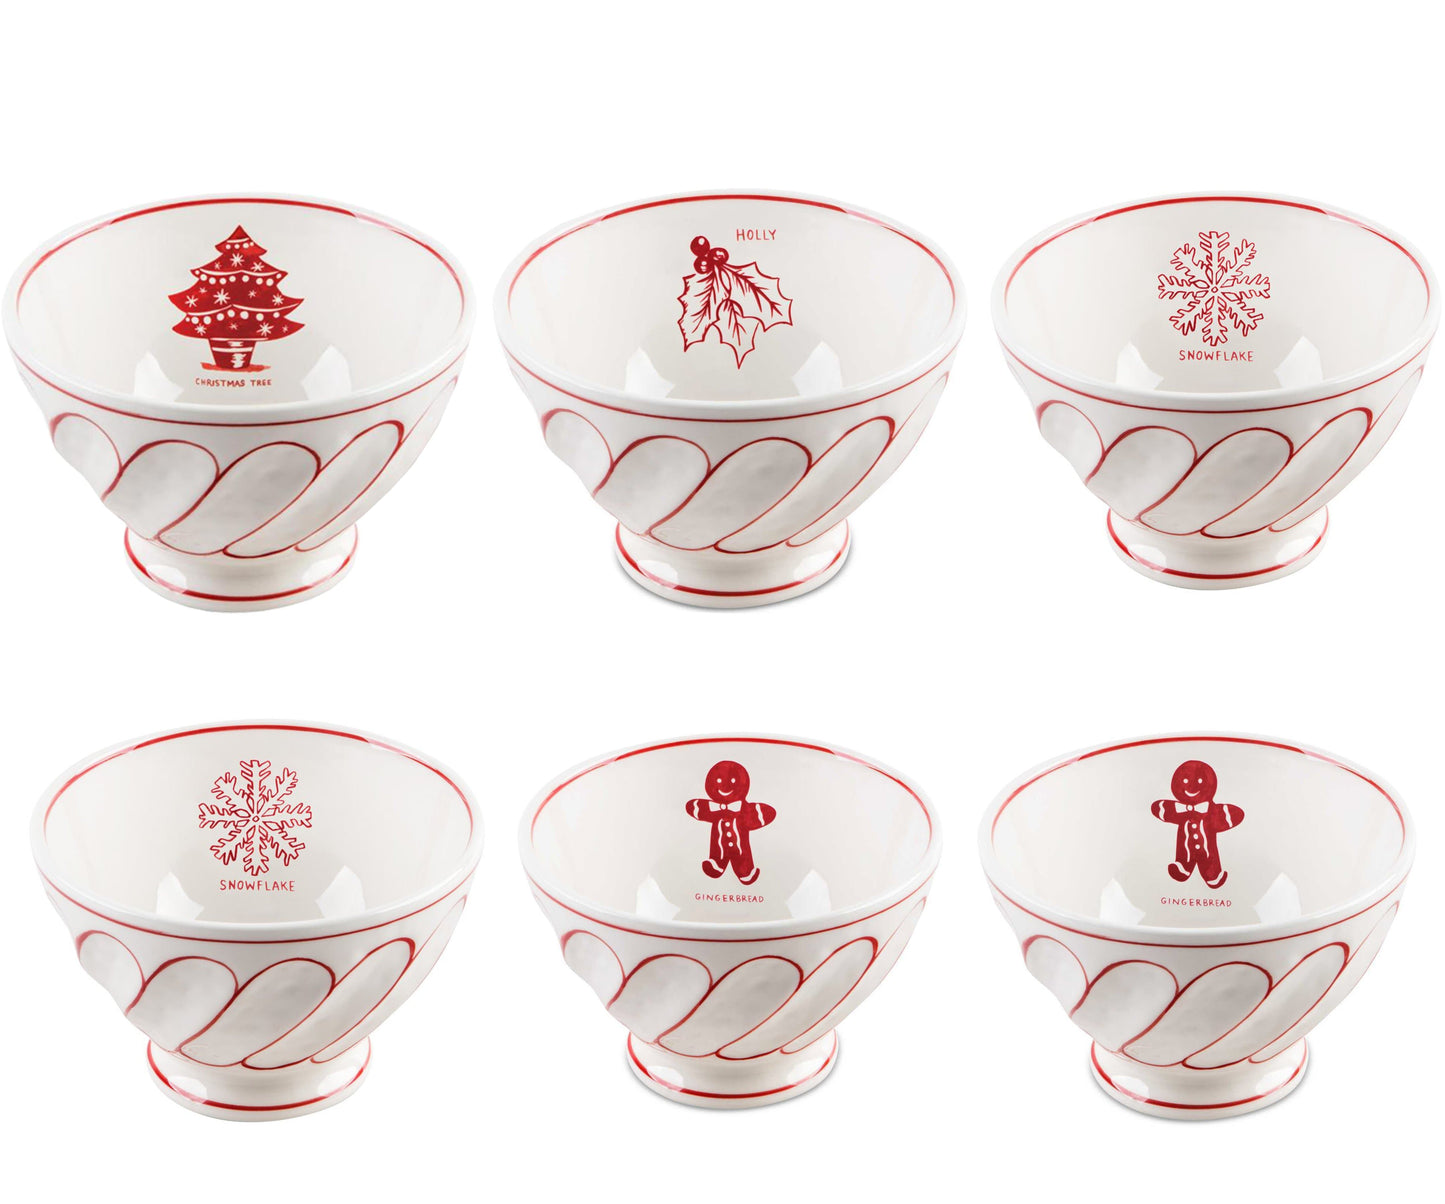 MOLLY HATCH Kitchenware MOLLY HATCH - Christmas Printed Bowls Dinnerware - 6 Pieces